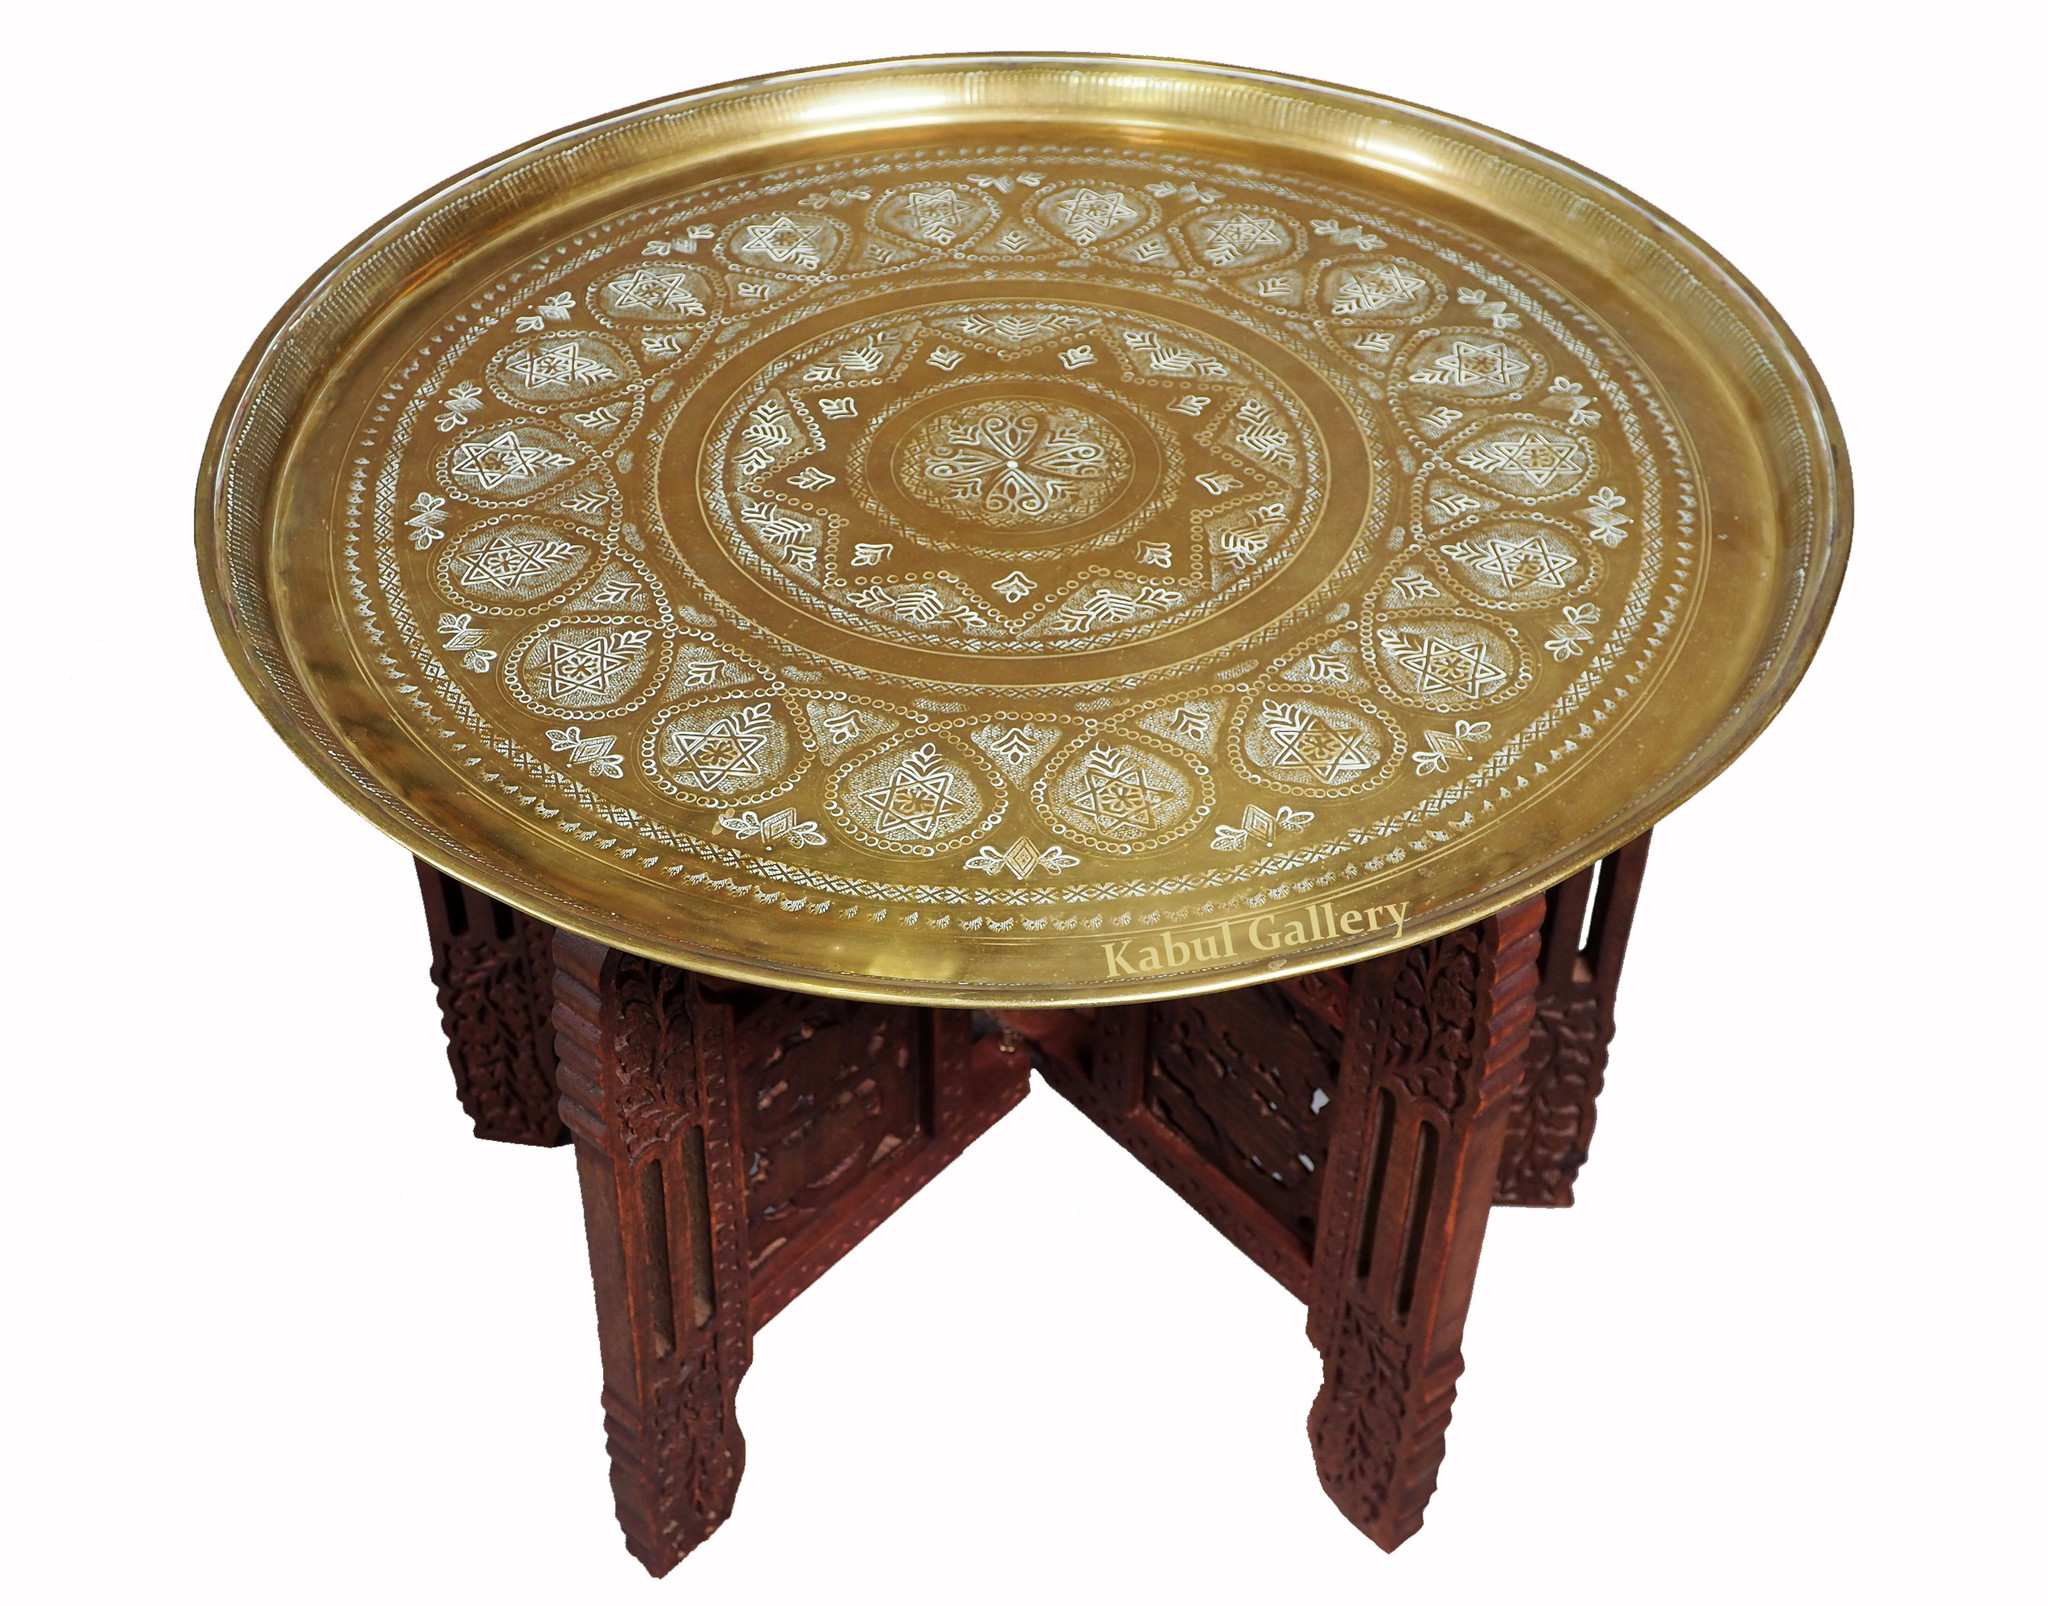 58  cm Ø  Antique ottoman orient Islamic  Hammer Engraved Brass table Tea table side table Tray from Afghanistan  No-HH - 6